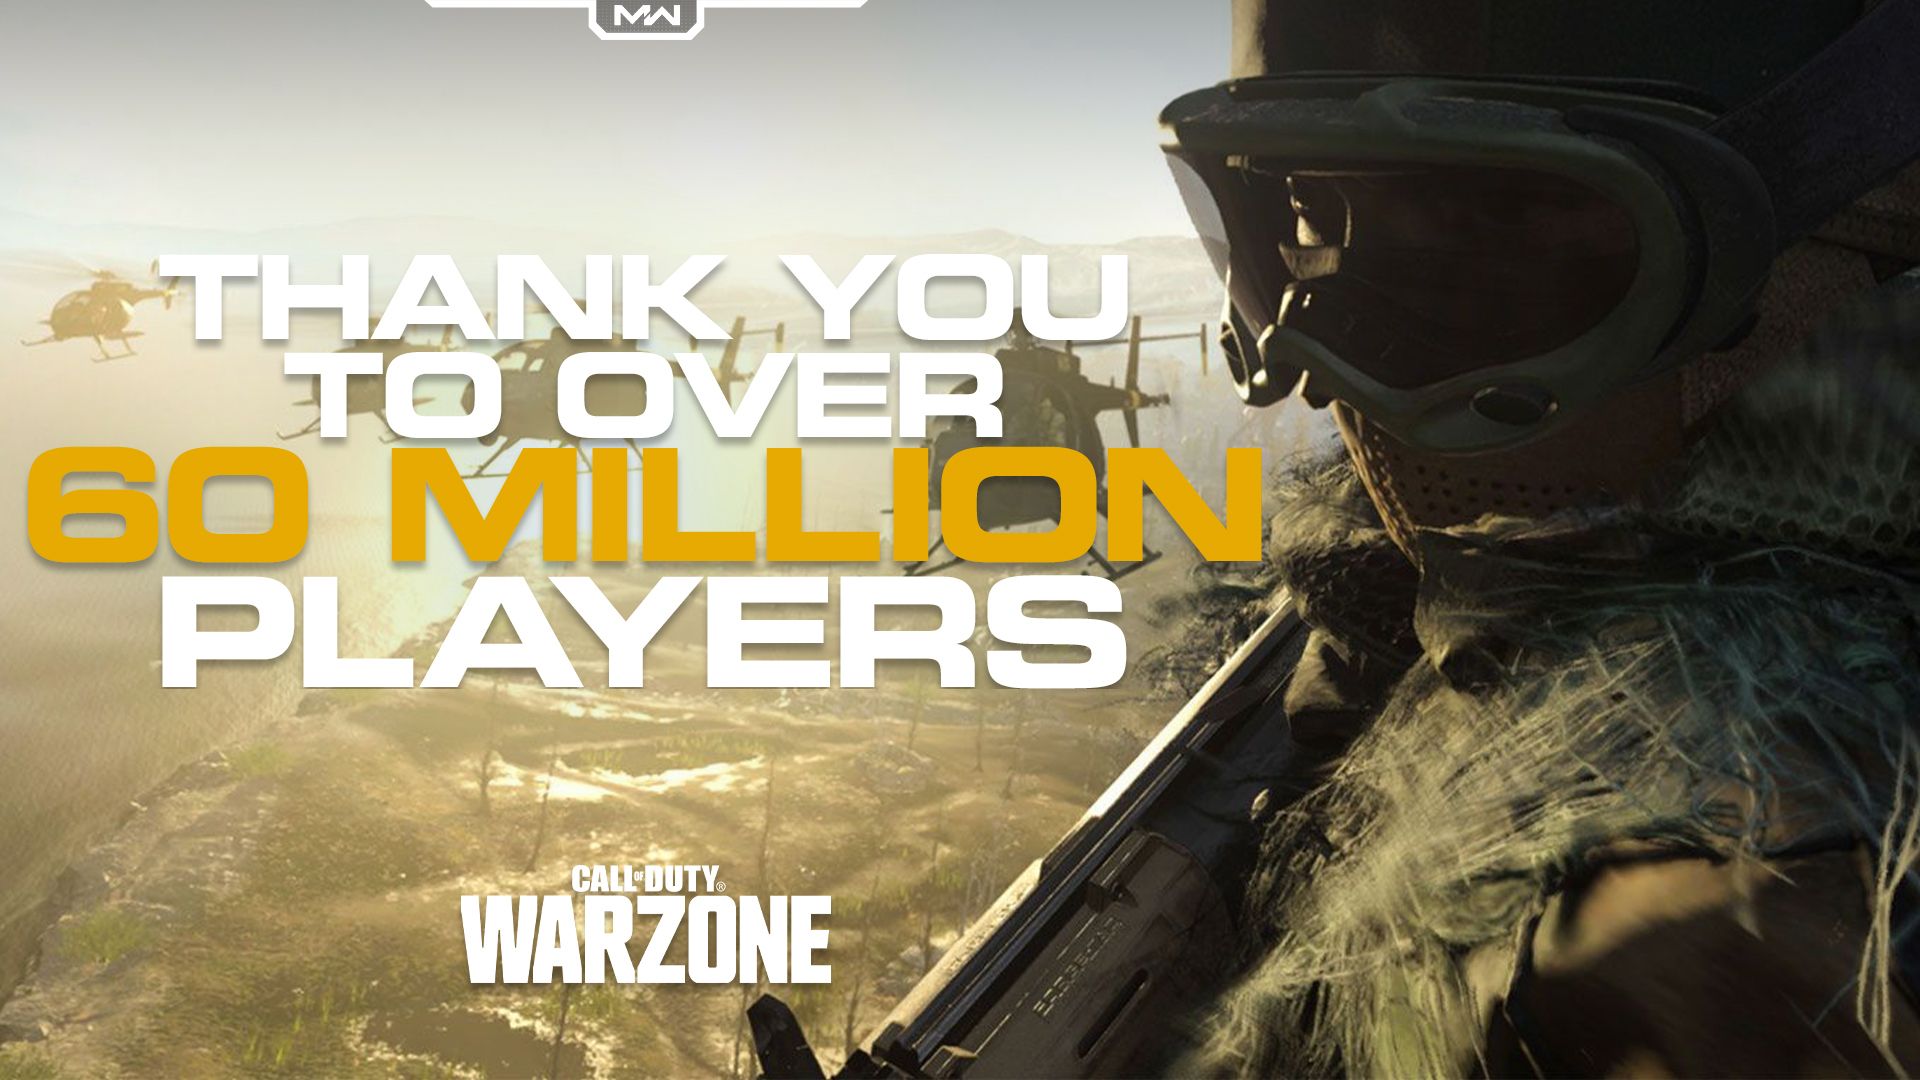 New report shows that Call of Duty: Warzone is more popular on